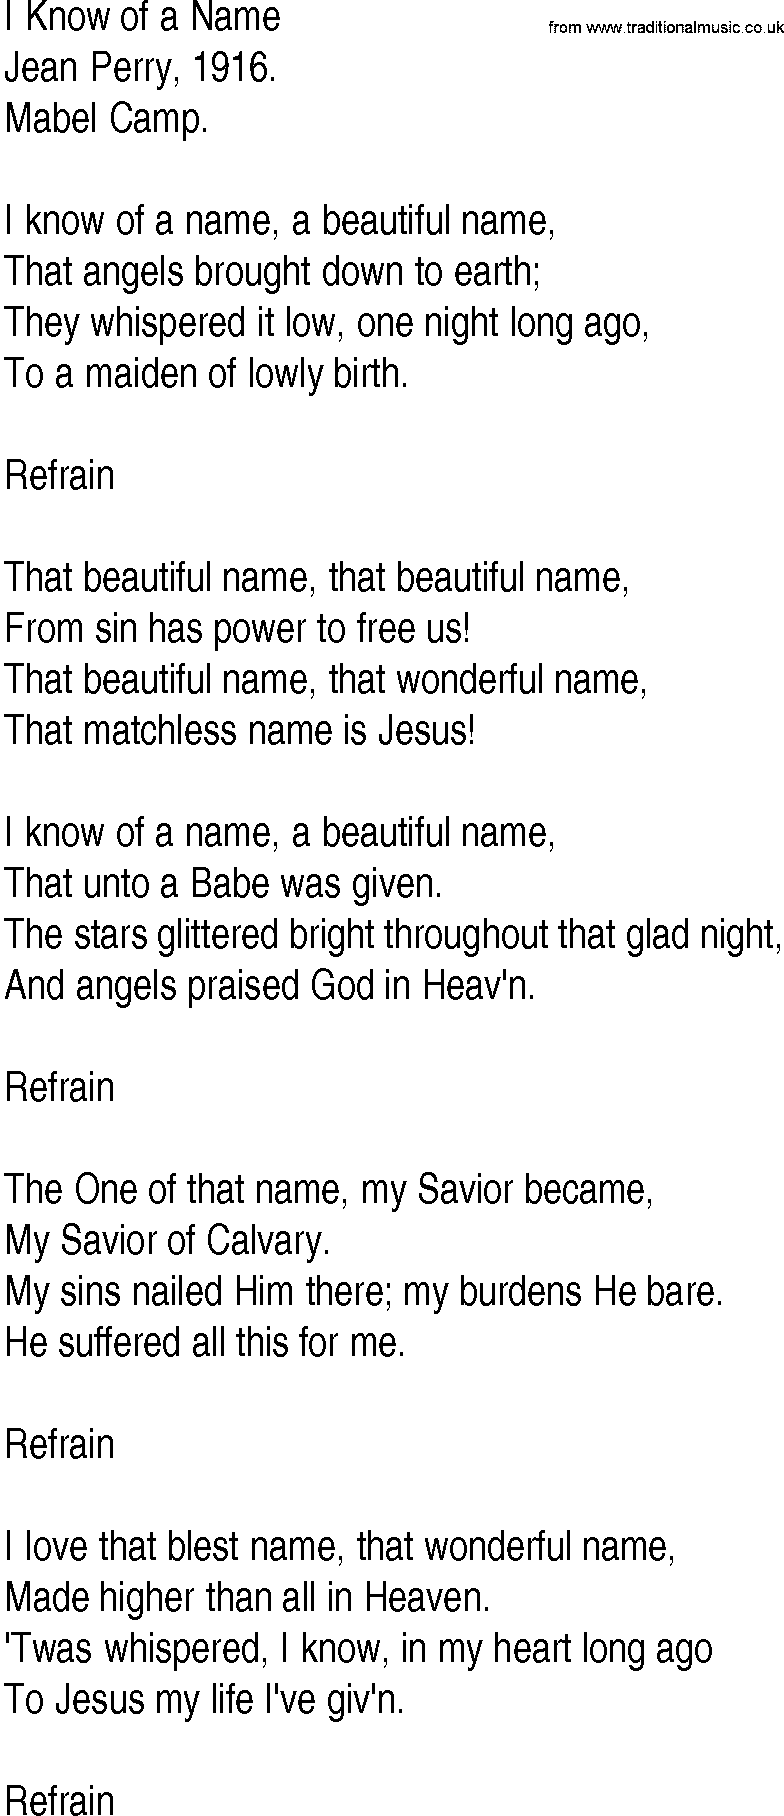 Hymn and Gospel Song: I Know of a Name by Jean Perry lyrics